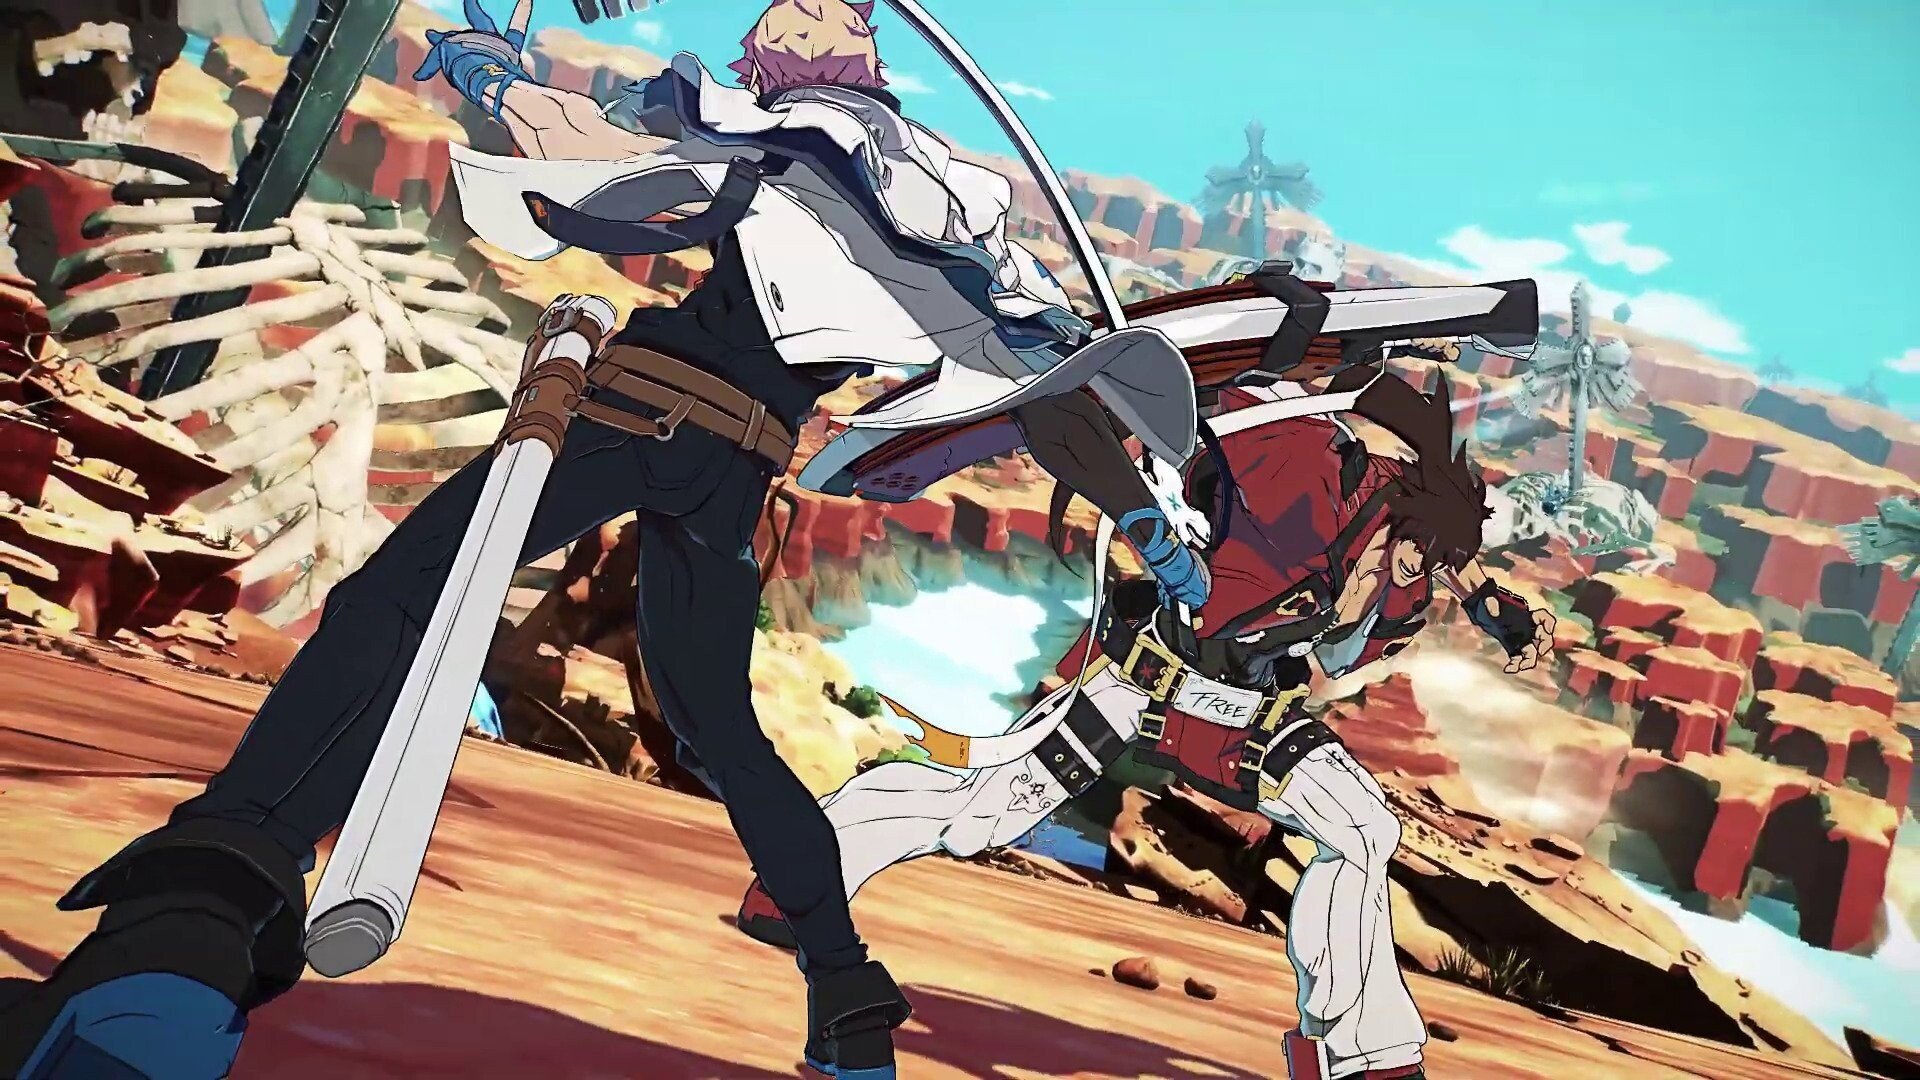 Guilty Gear Strive: Public Beta launches February 18 on PS5 and PS4